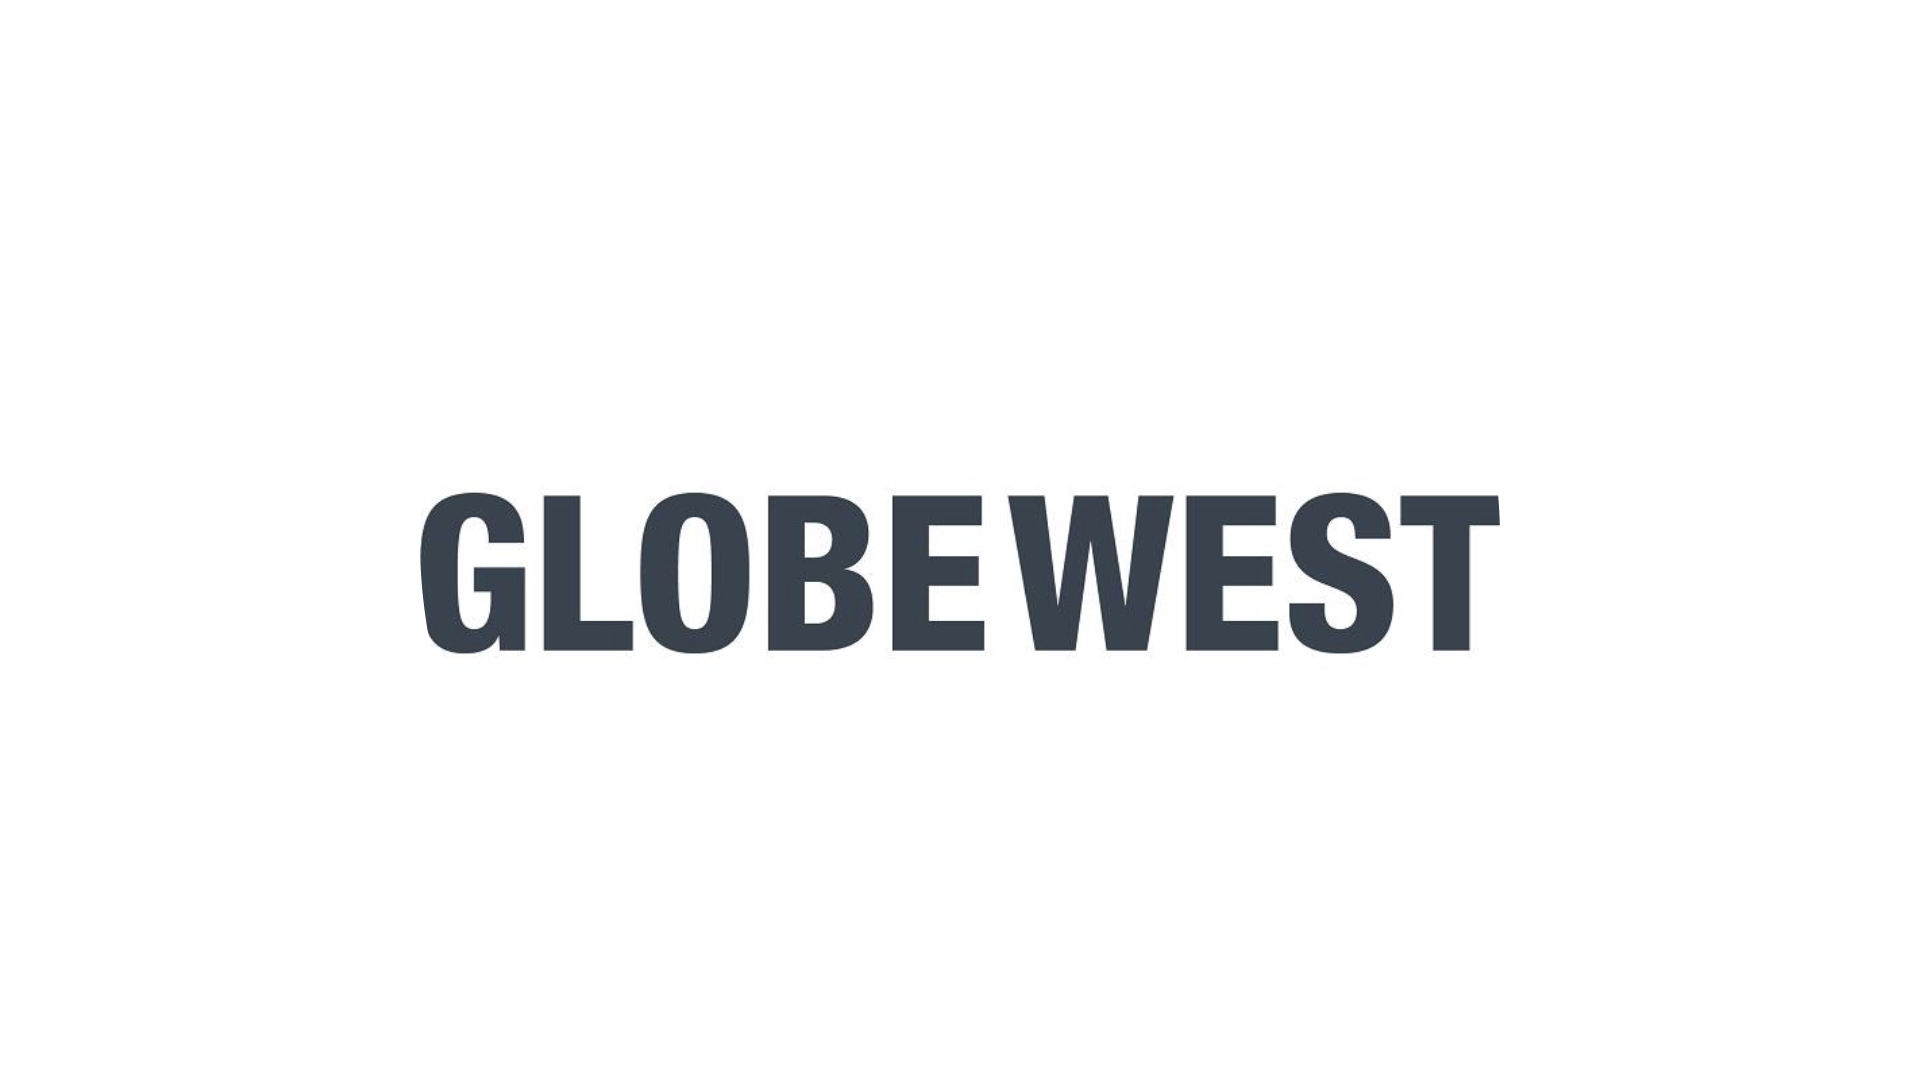 Get the Luxe Noir style with Globewest